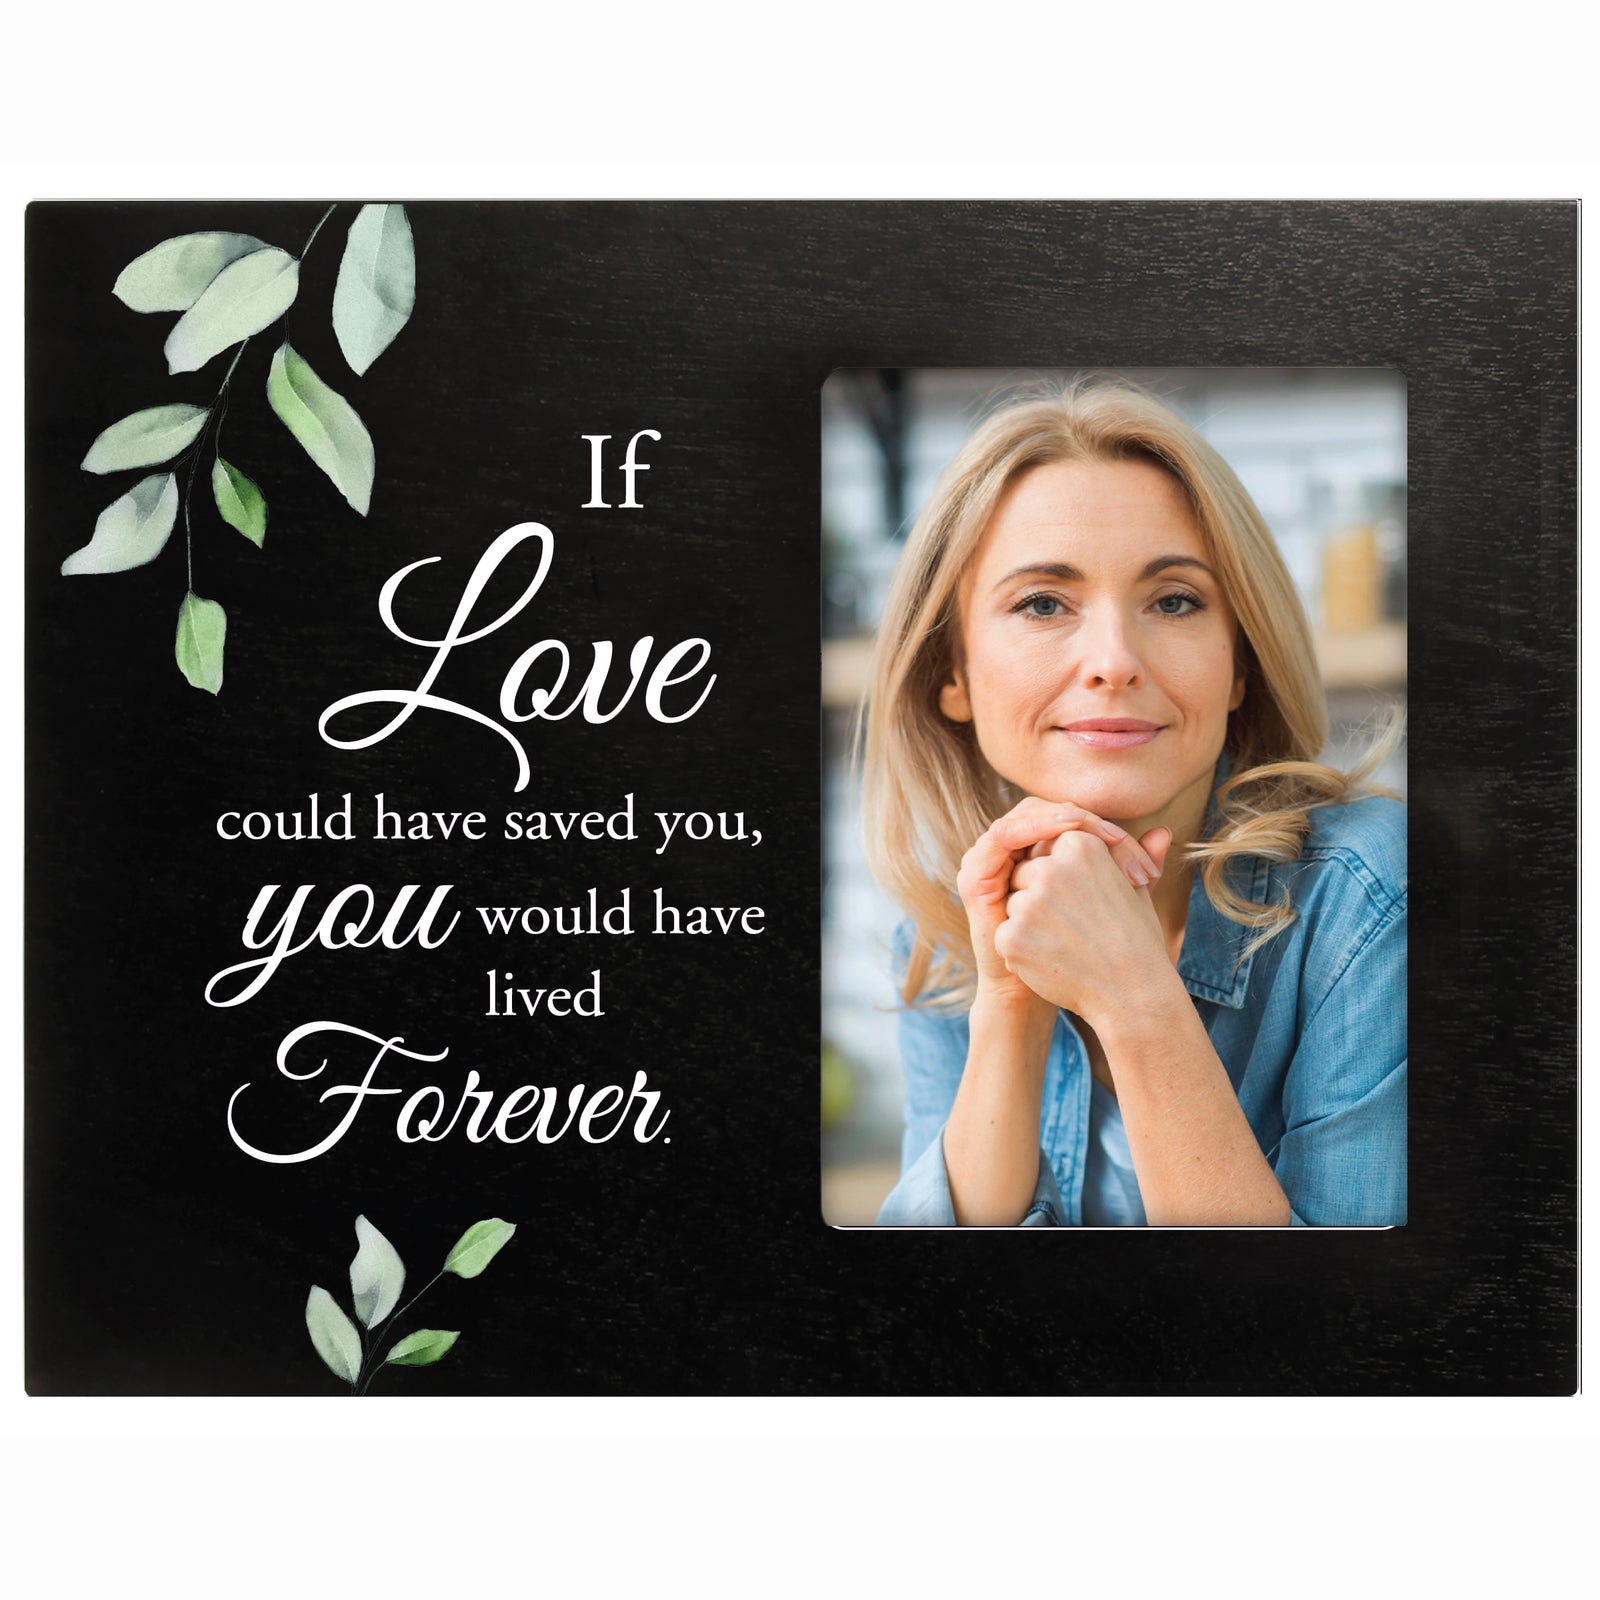 Sentimental Human Memorial Photo Frame Gift Bereavement Gift Idea - If  love could have